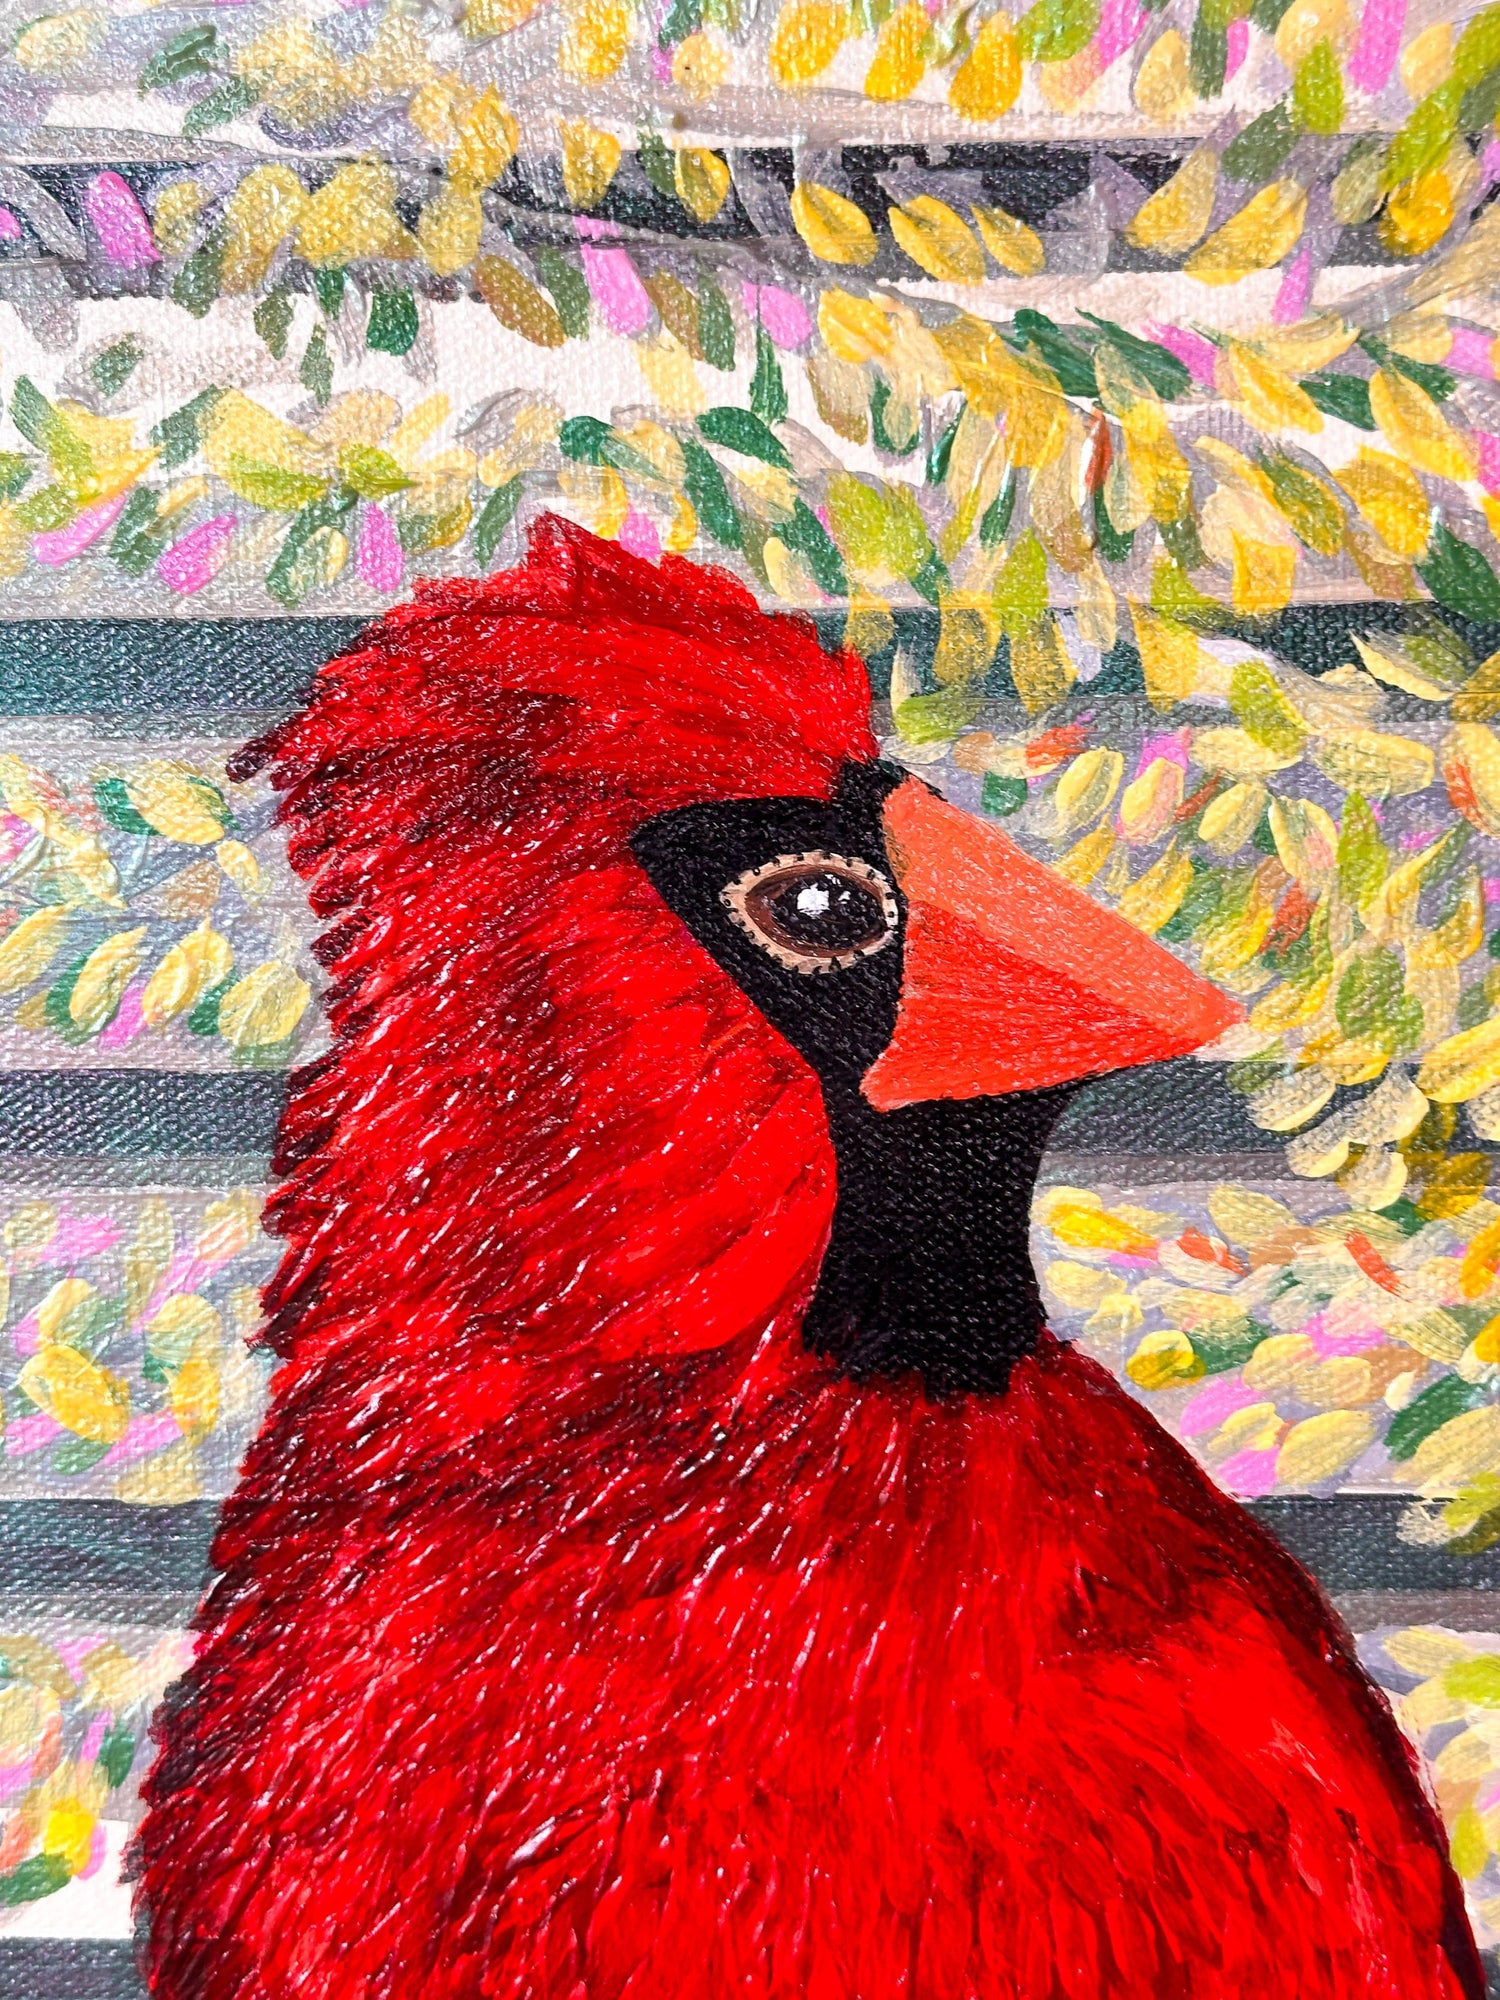 Red Cardinal in Spring Blossoms Acrylic on Canvas Maximalist Painting Acrylic on Canvas, 24”x 36” HELLO MISS E. 